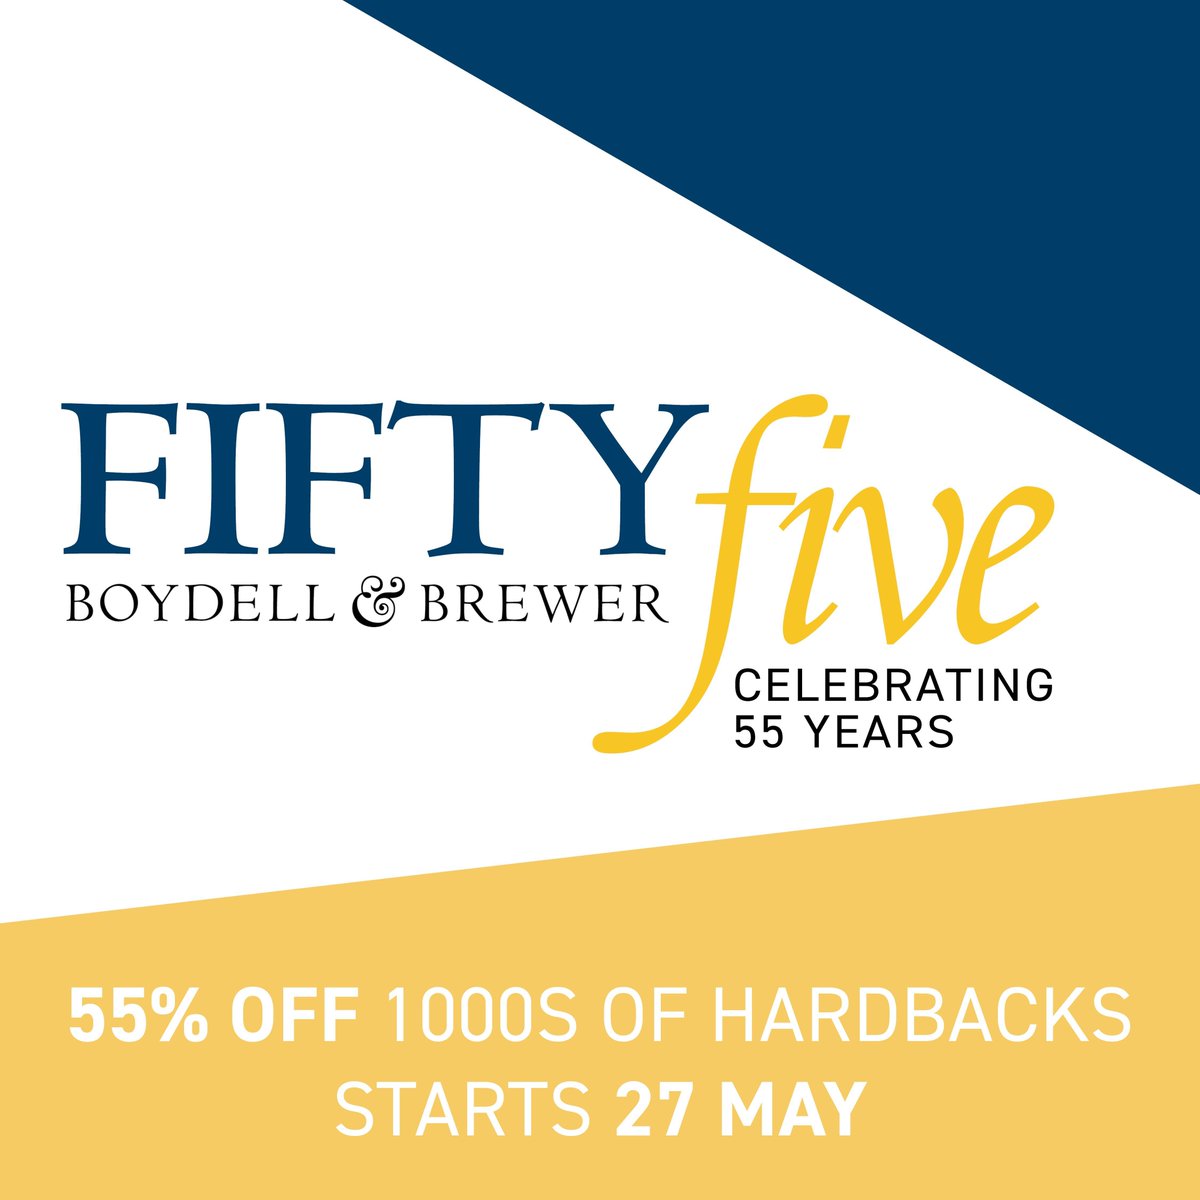 55% off 1000s of hardbacks starts 27 May. Watch this space or sign up for emails to learn more. buff.ly/3wGaGxd #BookSale #AcademicTwitter #Medieval #History #Literature #Music #African #Hispanic #German